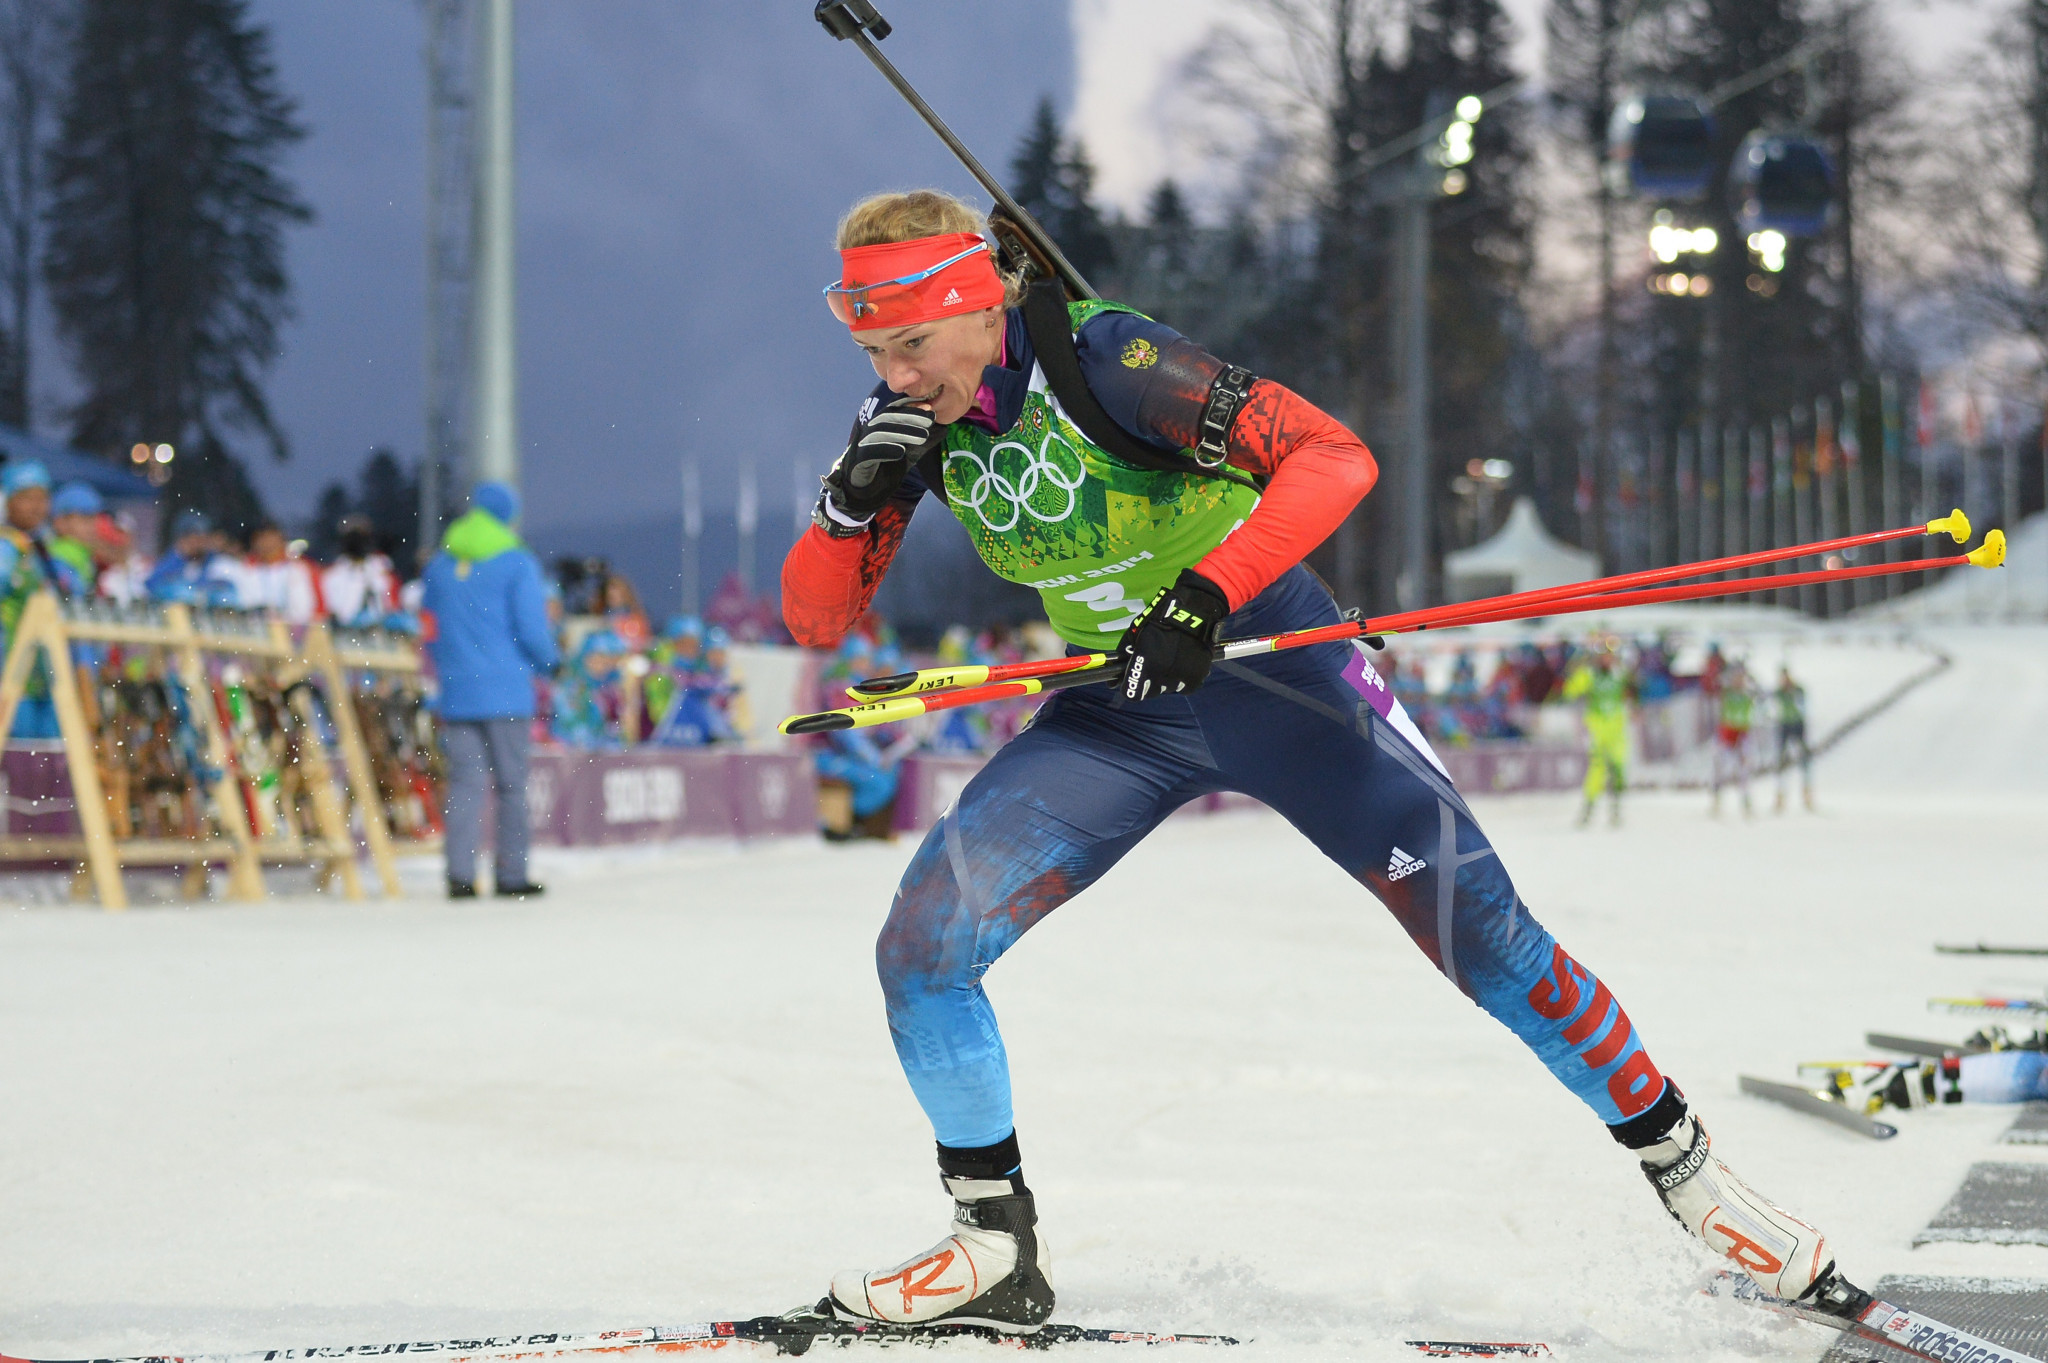 CAS cases against three Russian biathletes embroiled in Sochi 2014 scandal postponed